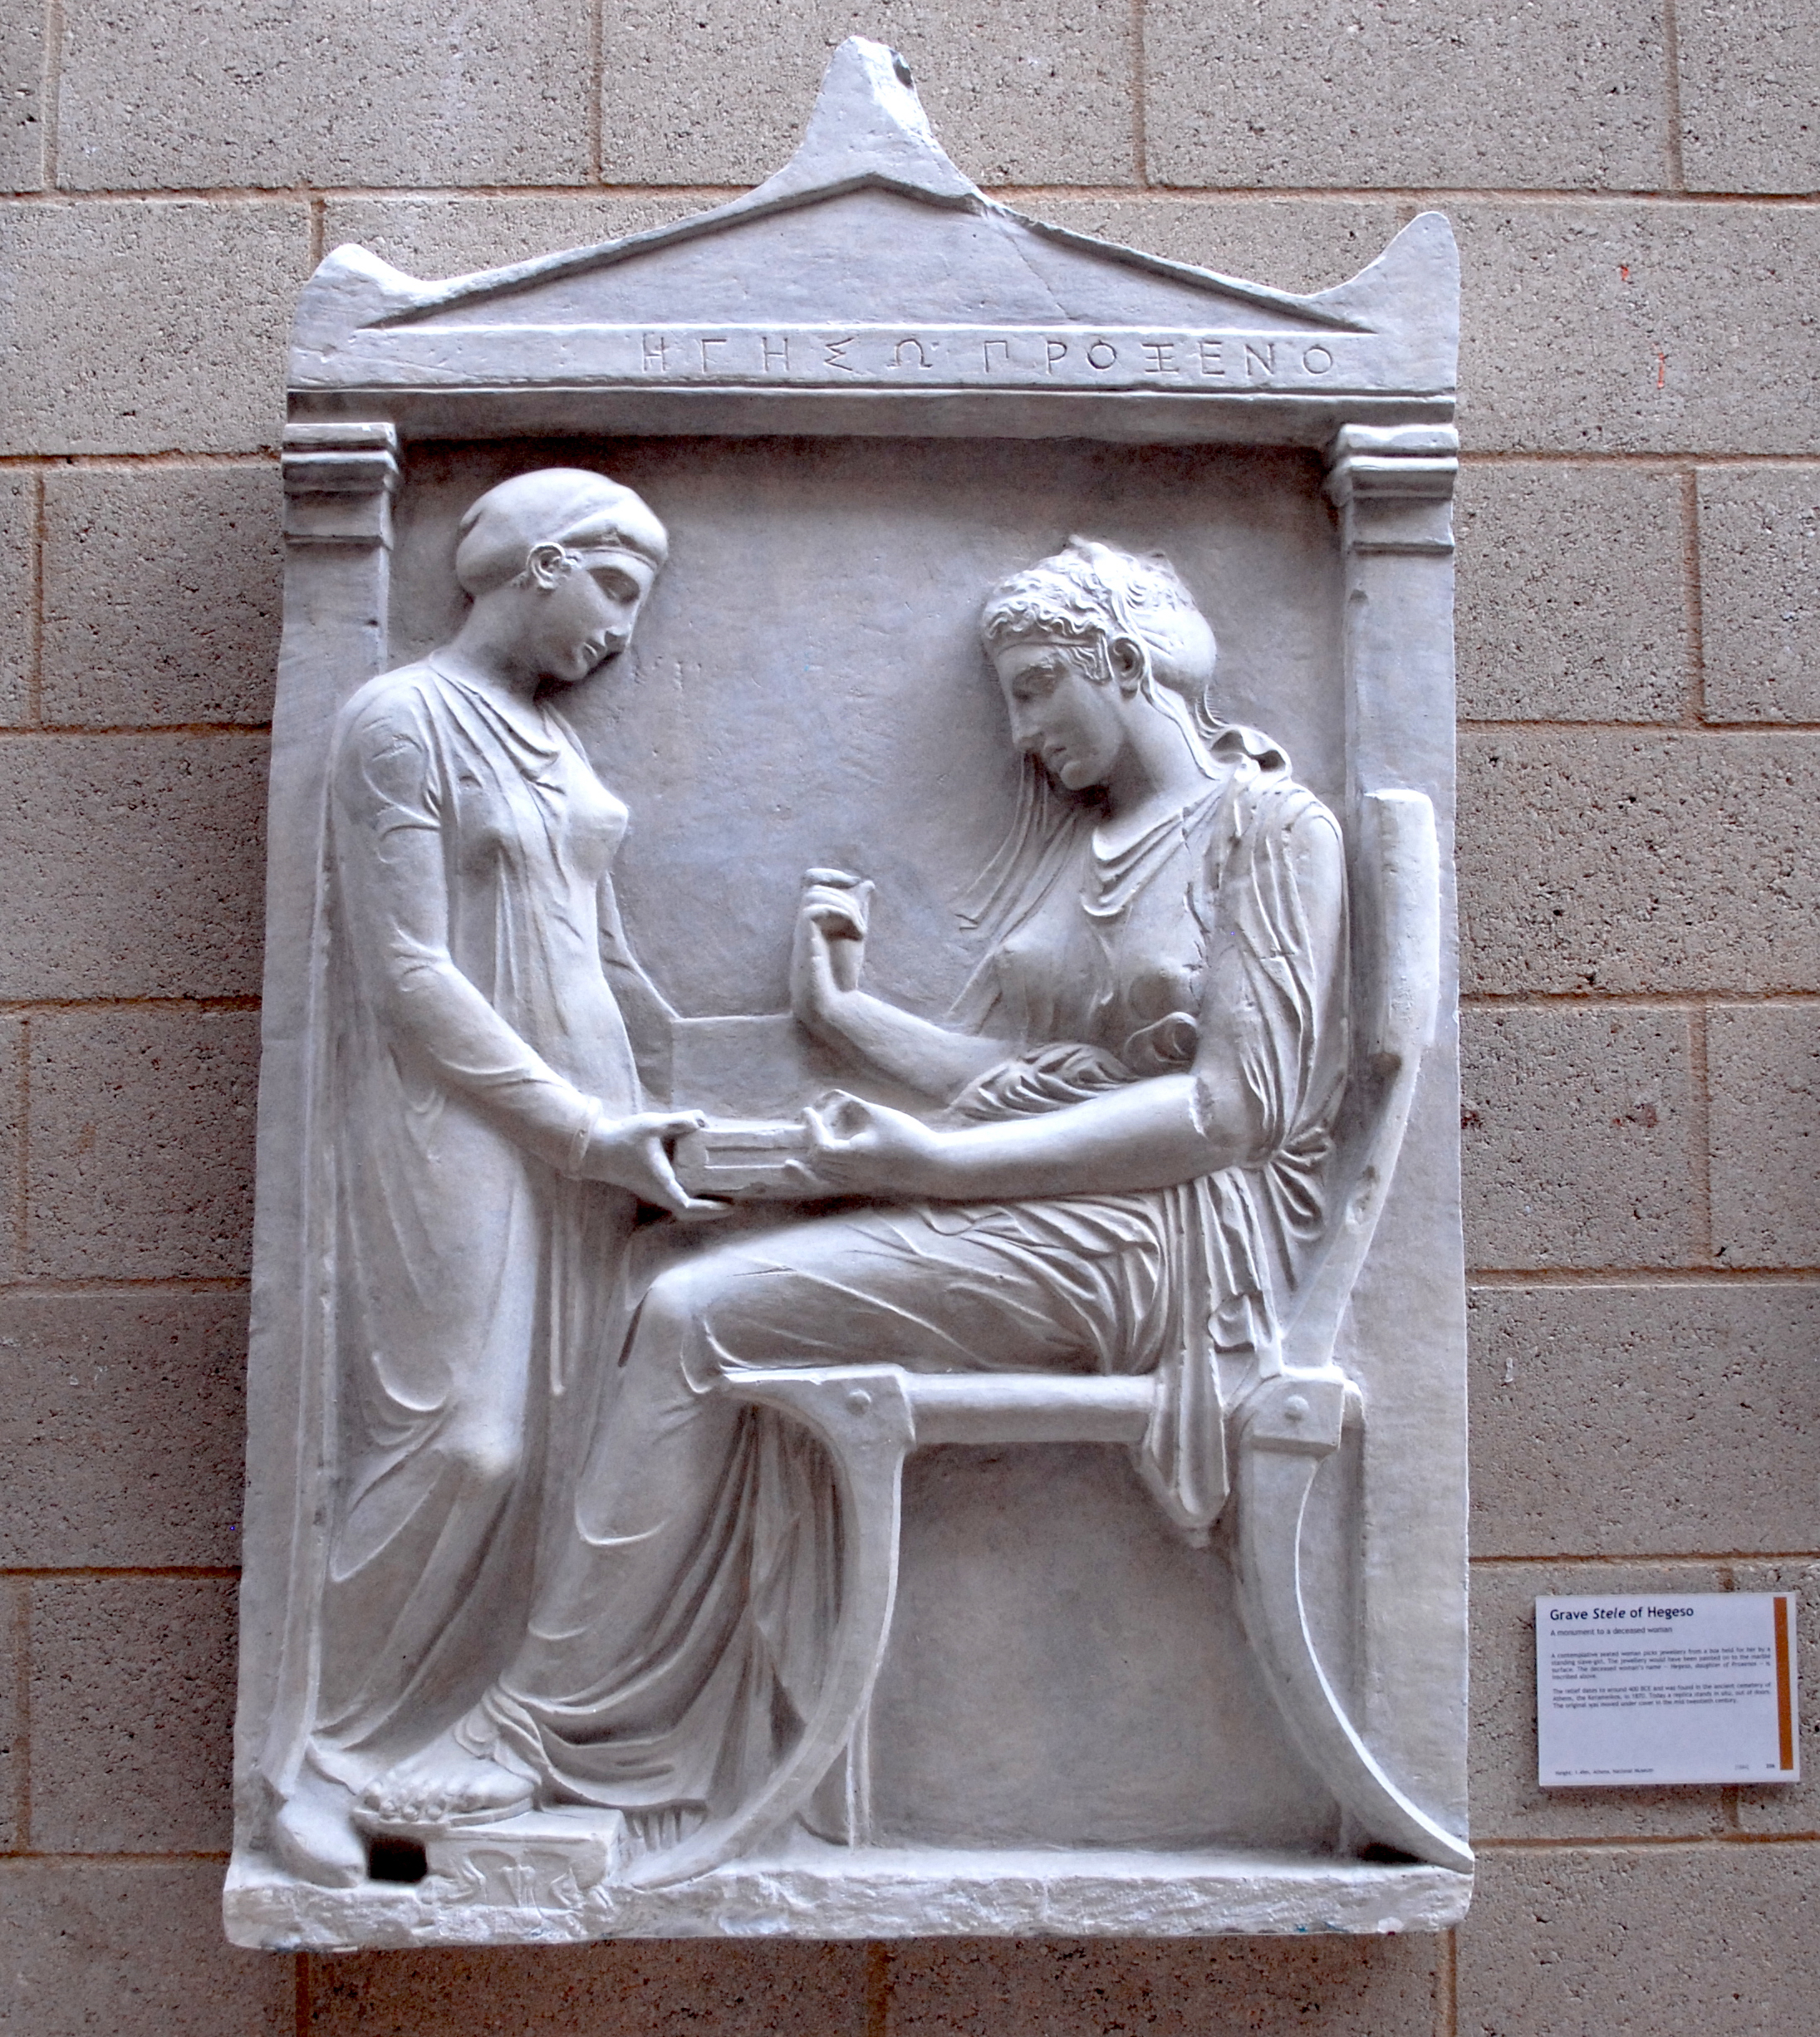 Plaster cast of Hegeso's grave monument, which is roughly rectangular, with a triangular pediment where Hegeso's name is written in Greek. It shows two women: on the right, a woman sits on a chair facing left, wearing a long, draped dress and elaborate hairstyle; opposite her stands a smaller woman in plain clothes, holding out a box. The seated woman's left hand holds the box too. Her feet rest on a small footstool.